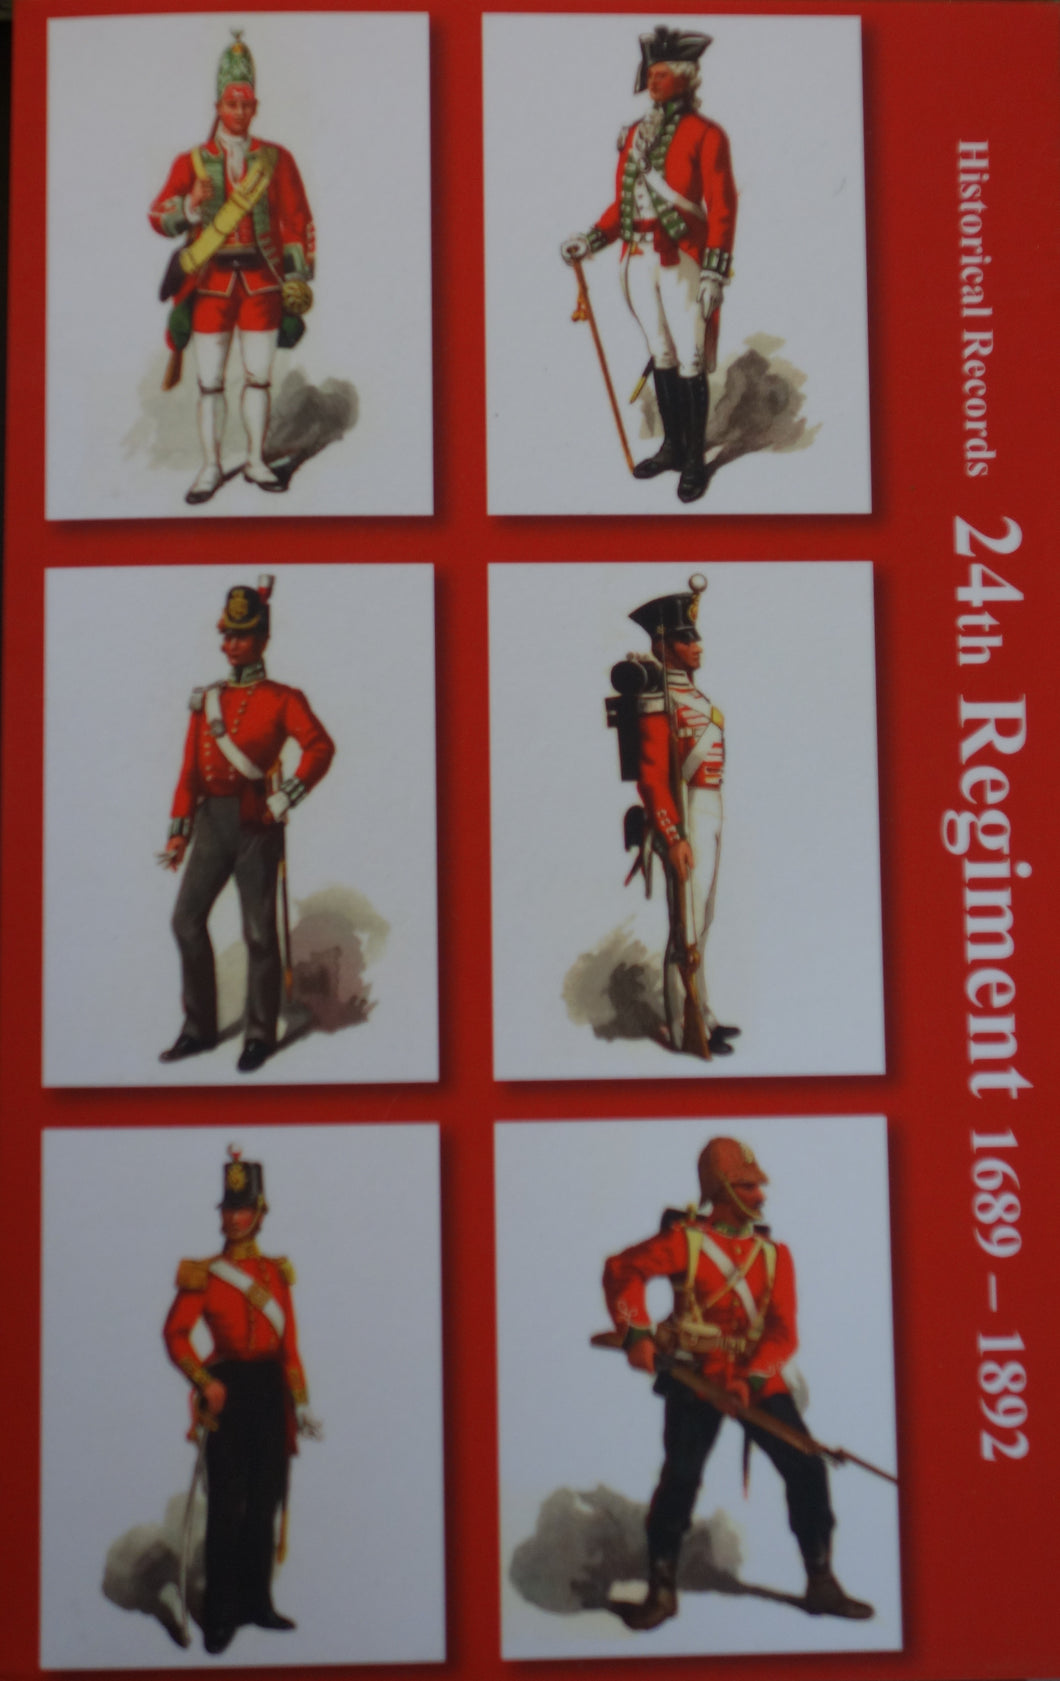 HISTORICAL RECORDS OF THE 24th REGIMENT, 1698-1892, by Paton, Glennie and Penn-Symons